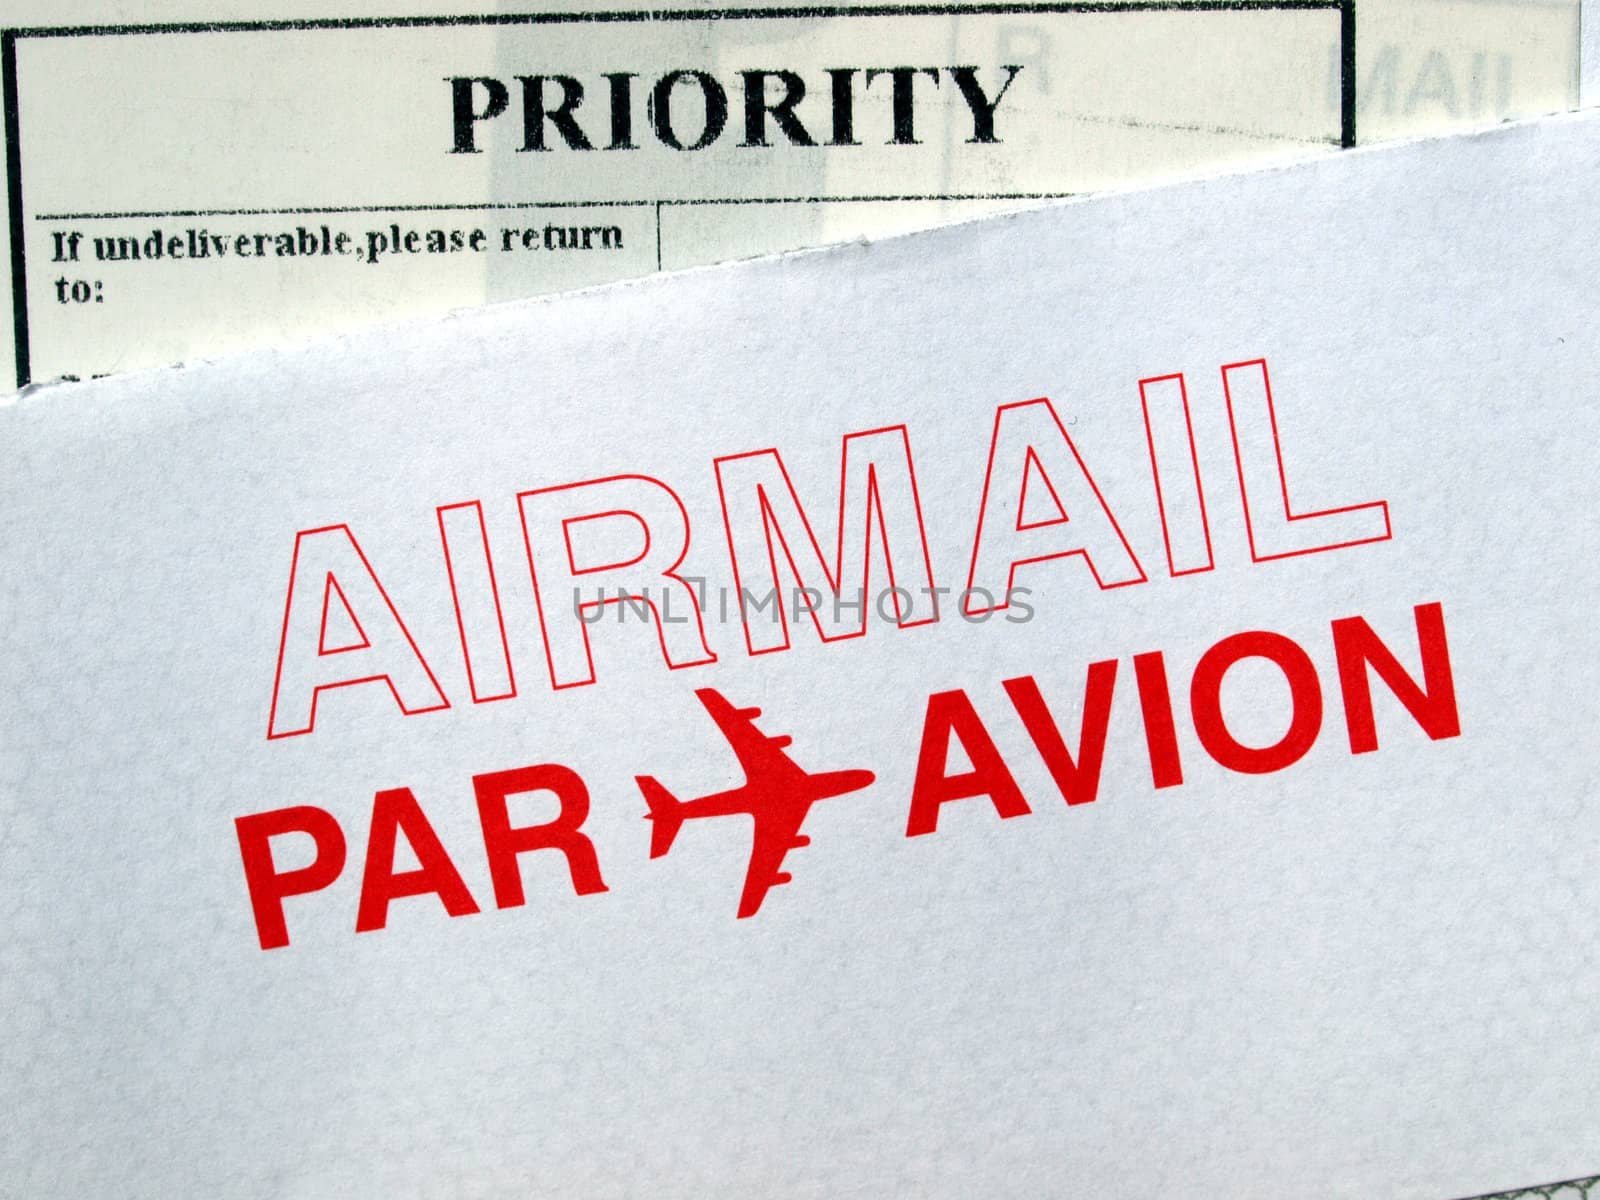 Airmail by claudiodivizia